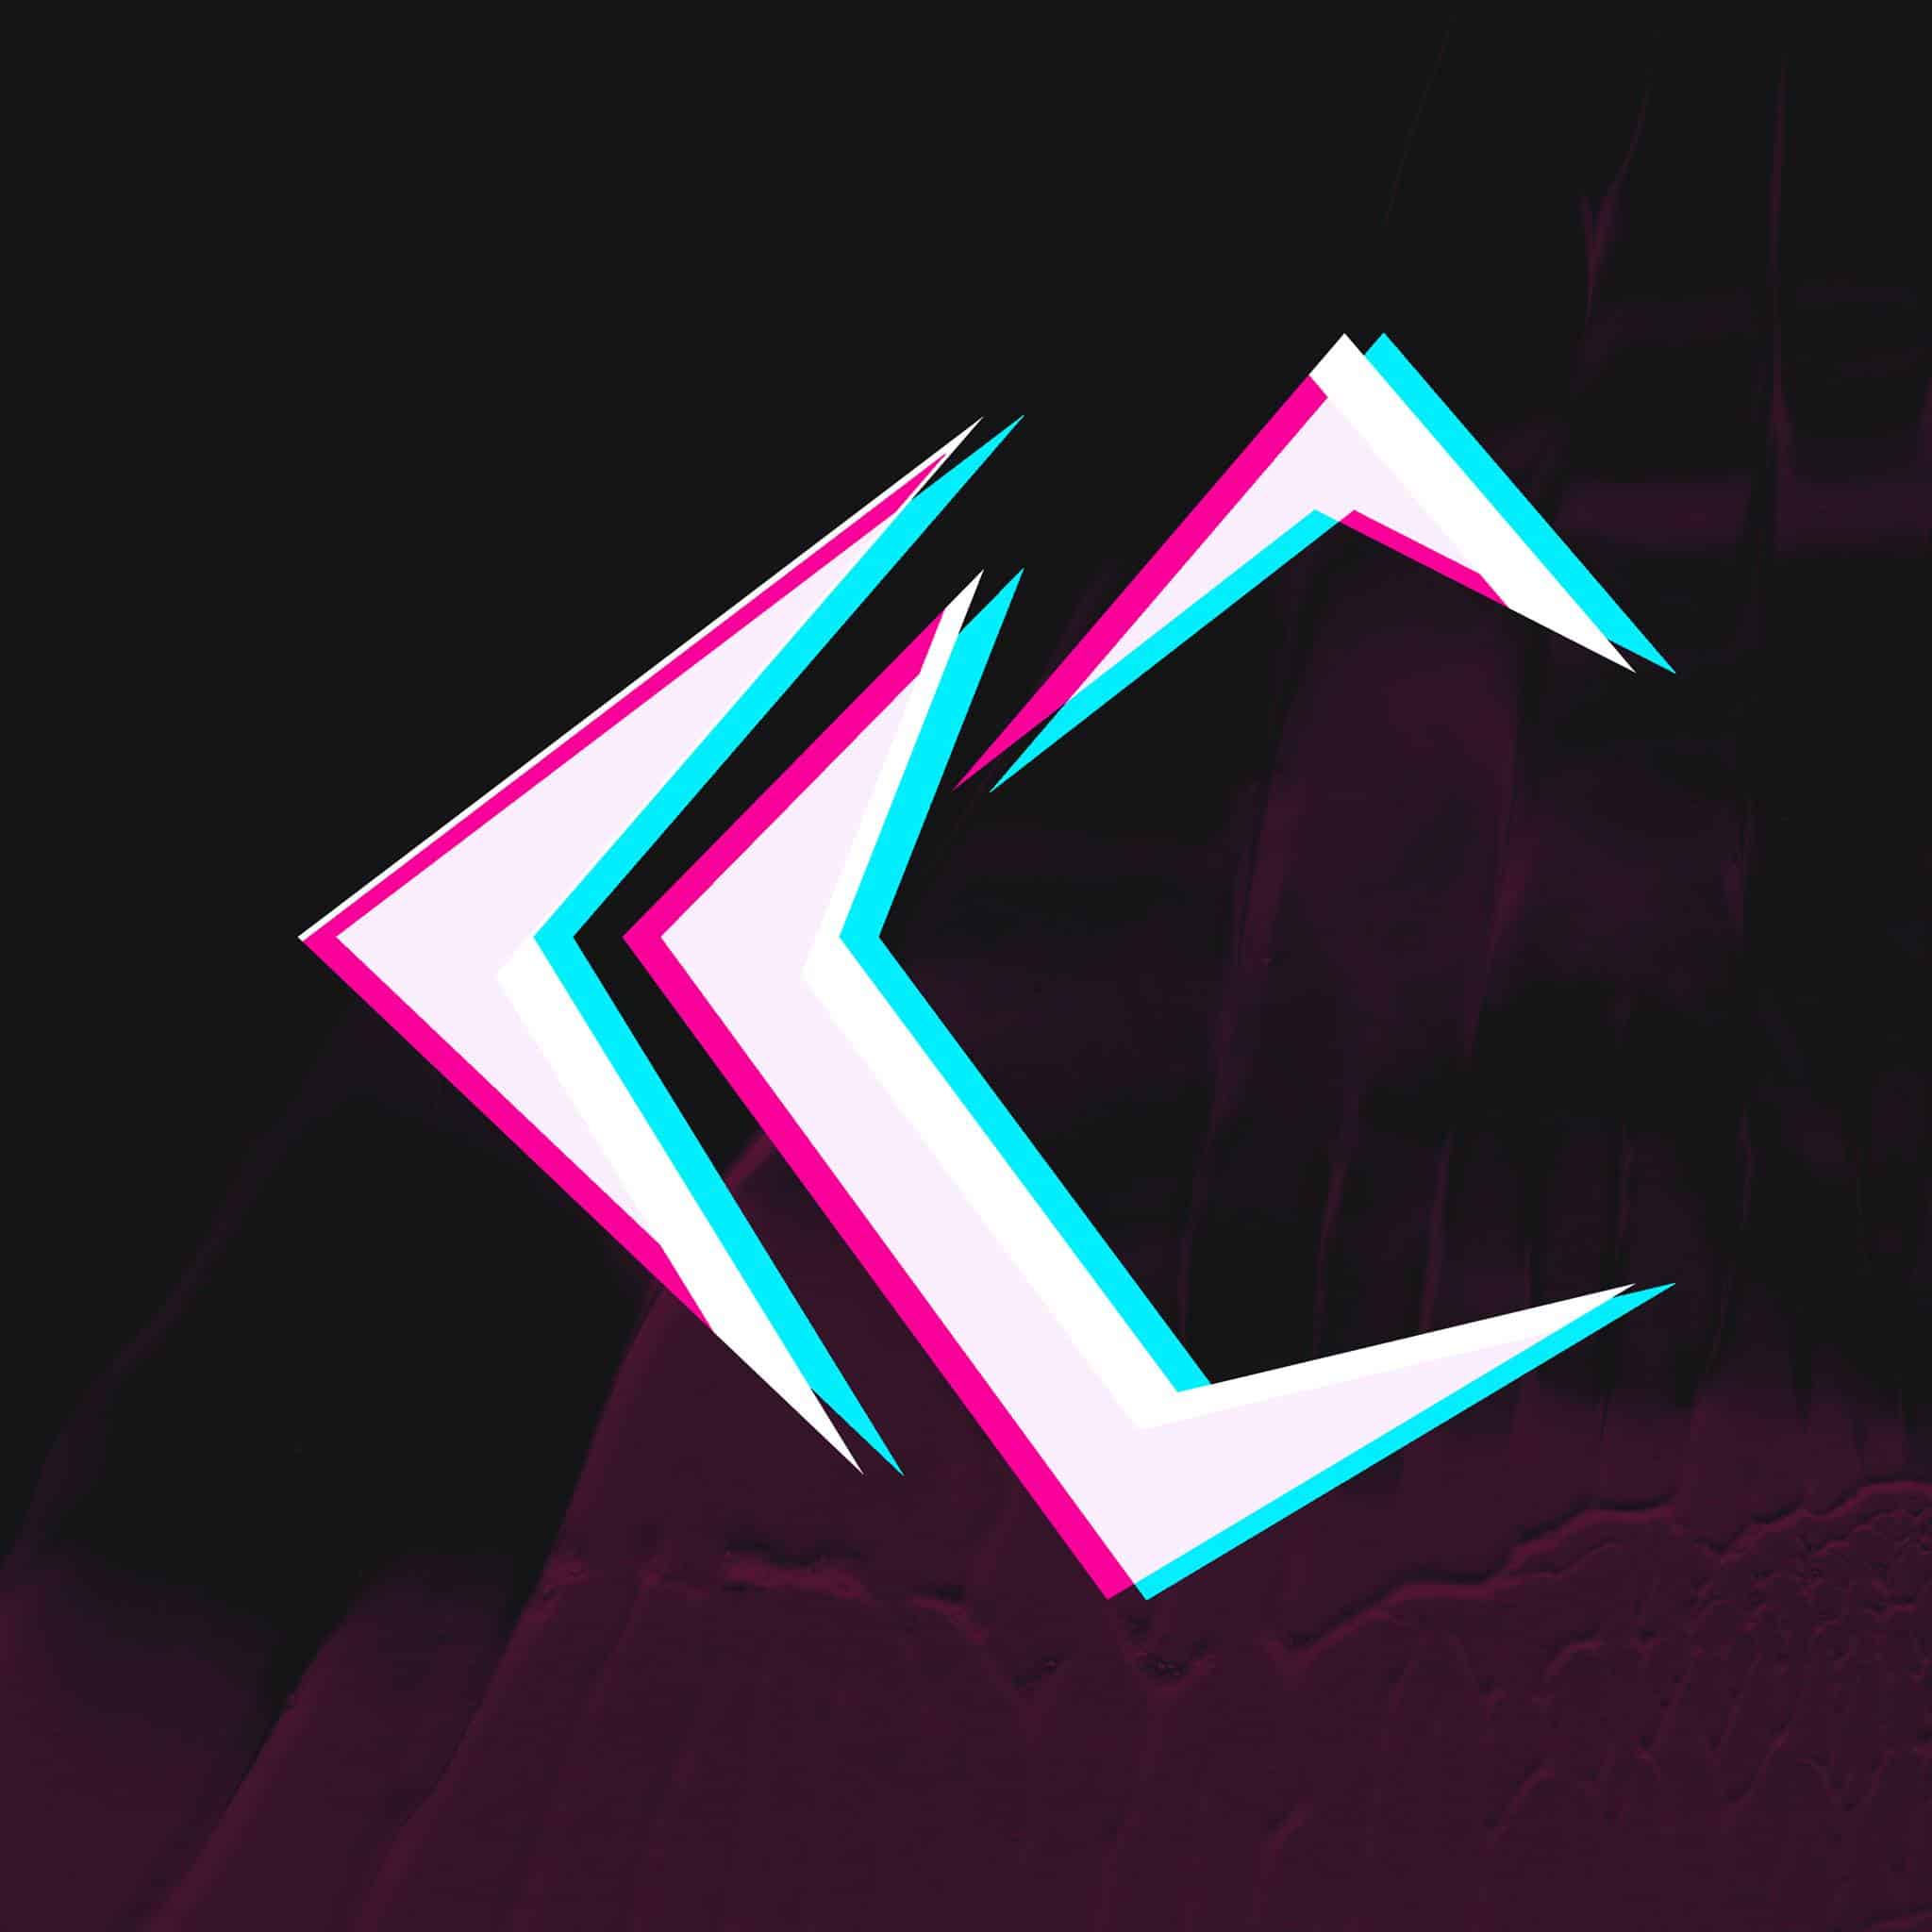 The letter c in KSHMR style on a black background.